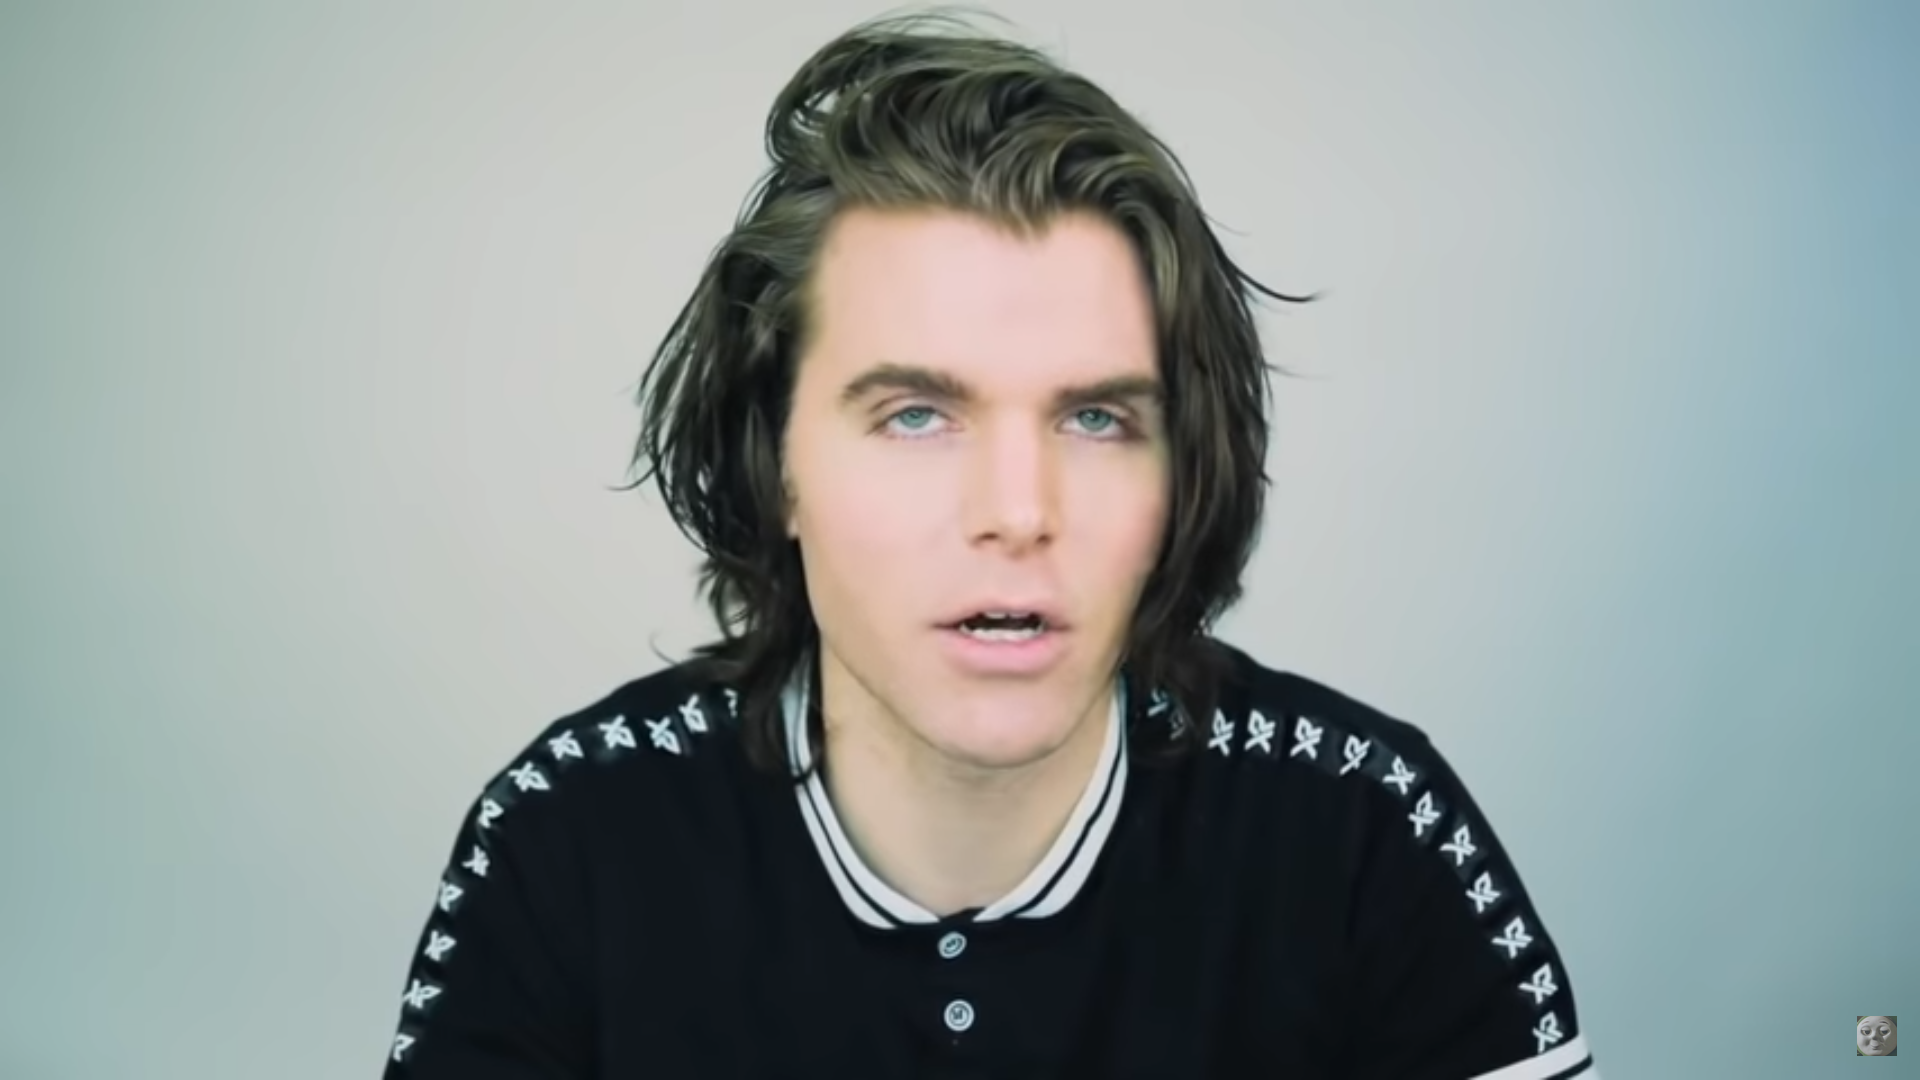 Does onision have a kid